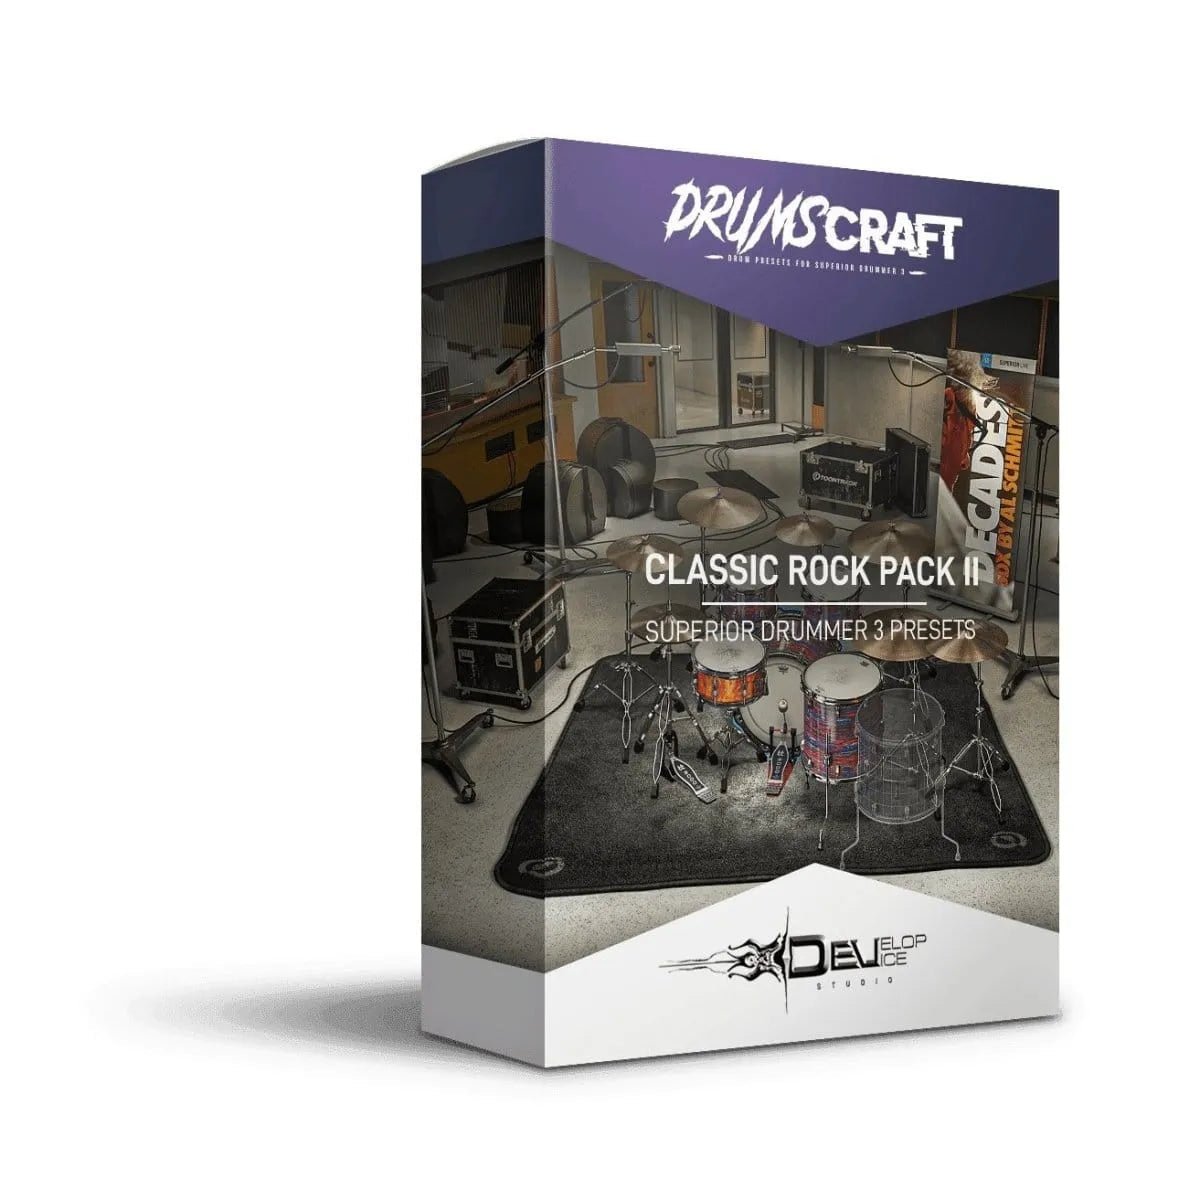 Classic Rock Pack II - 5 Presets for Superior Drummer 3 - Superior Drummer 3 Presets by Develop Device